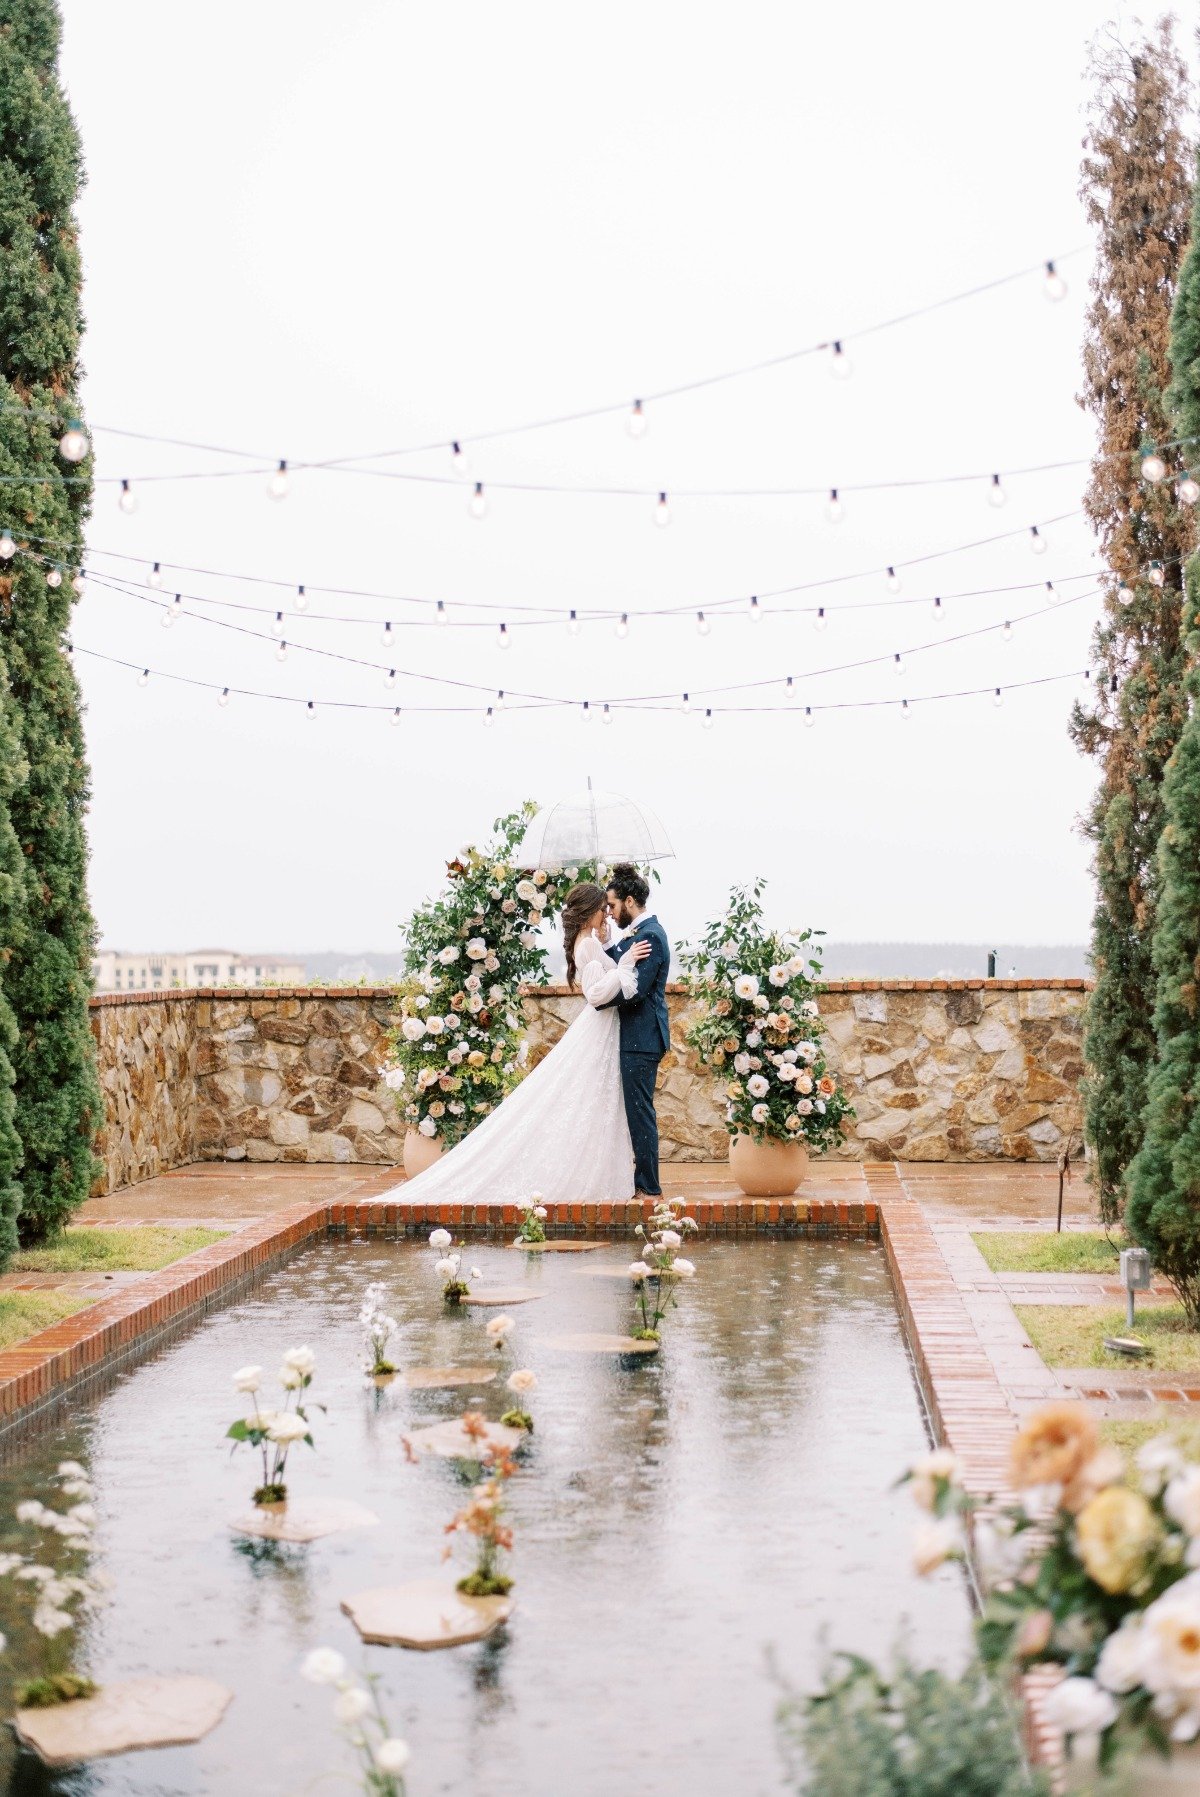 Bride and groom in front of ceremony altar holding clear umbrella